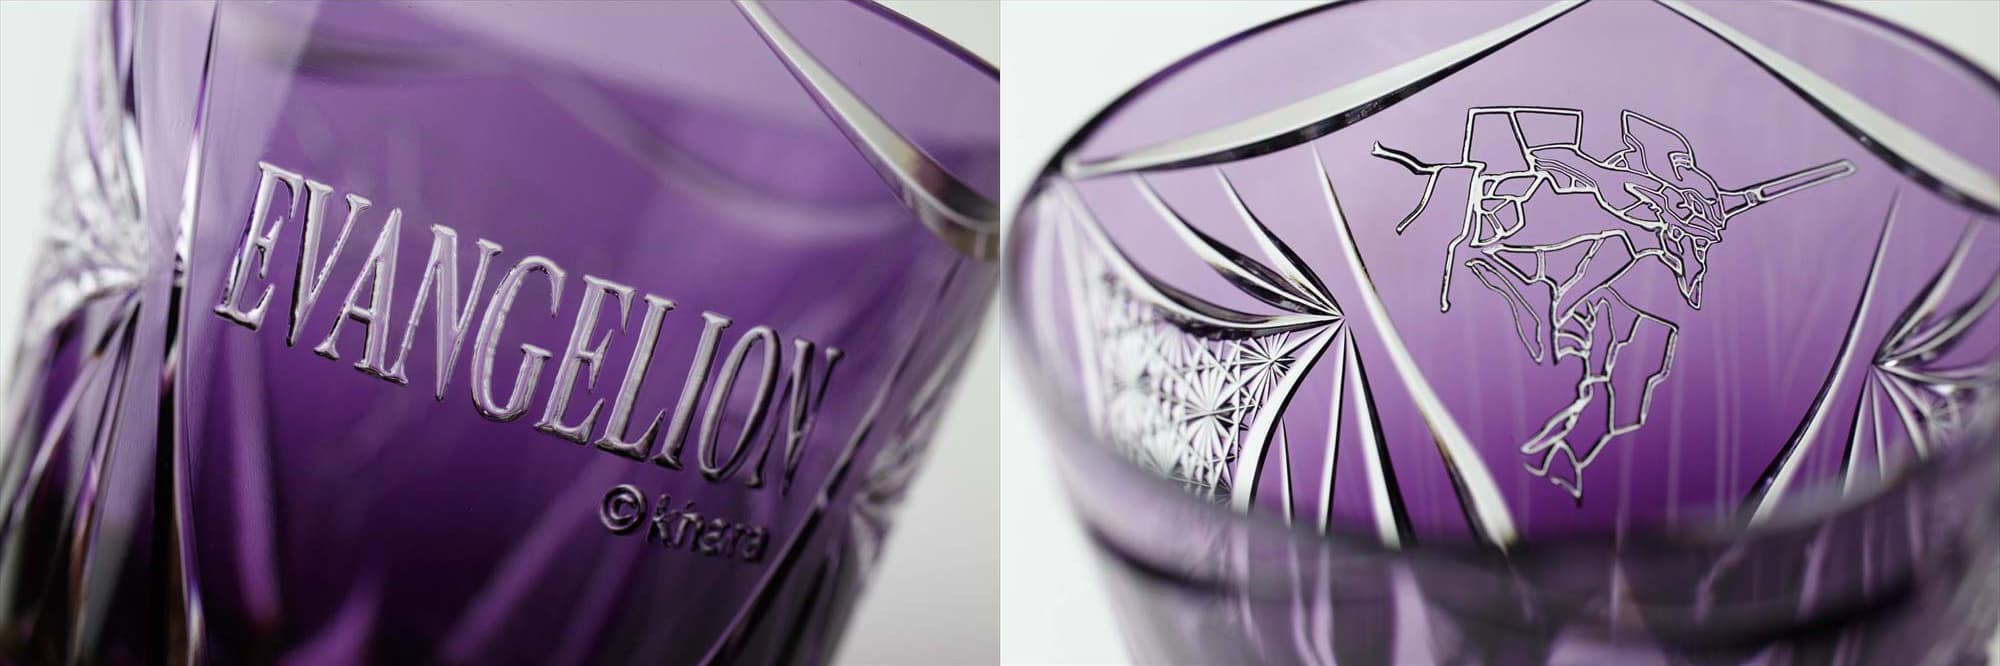 Ryokotomo - e6e809d9 evangelions unit 1 featured on limited edition edo faceted glass